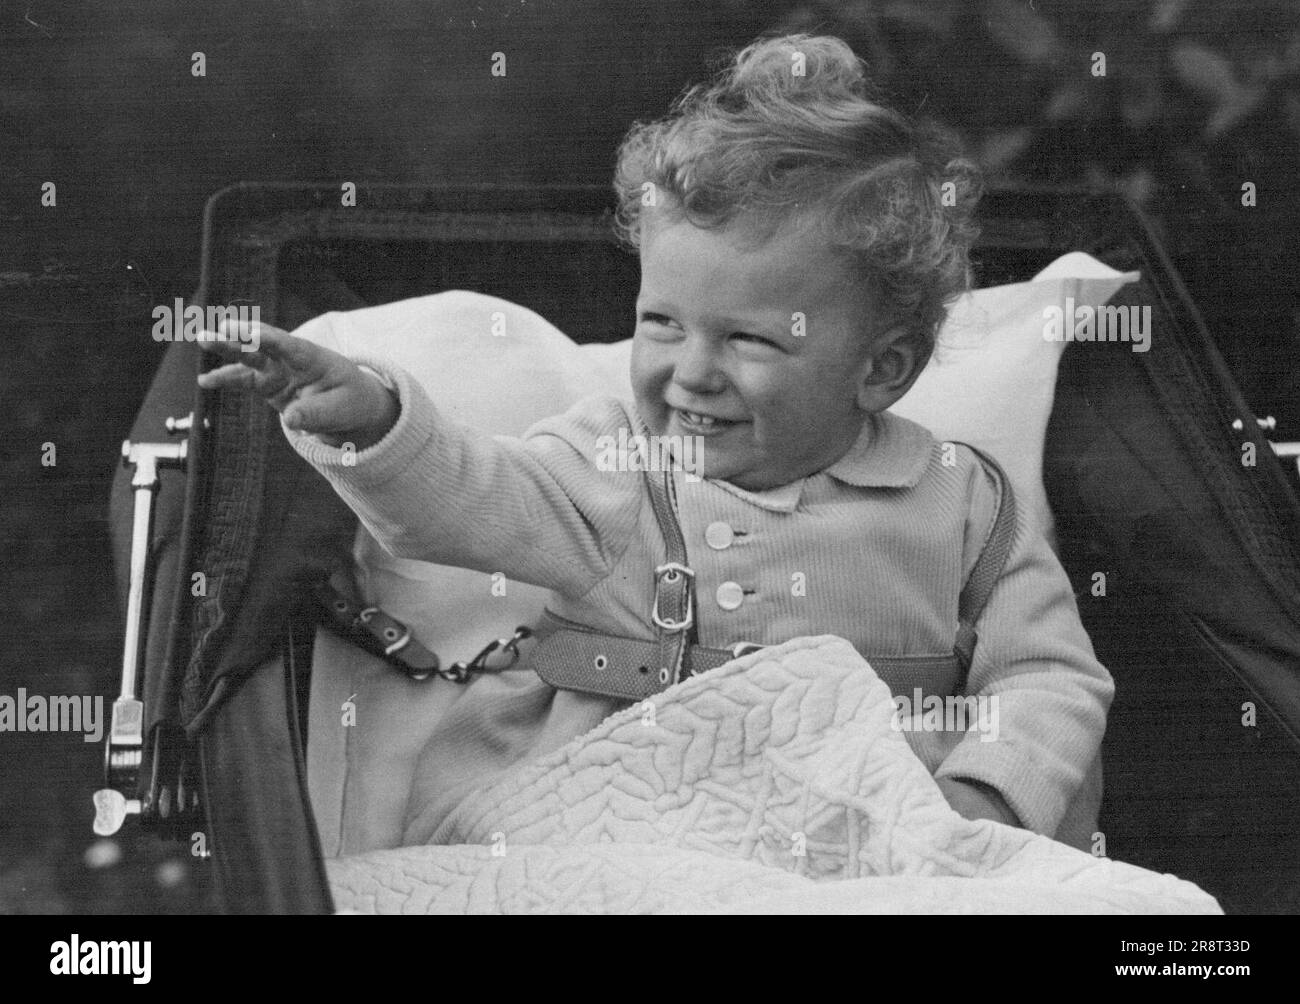 The Latest Picture Of Prince Edward - Prince Edward the one year old son of the Duke and Duchess of Kent, photographed in the grounds of their home at Belgrave Square. January 4, 1937. Stock Photo